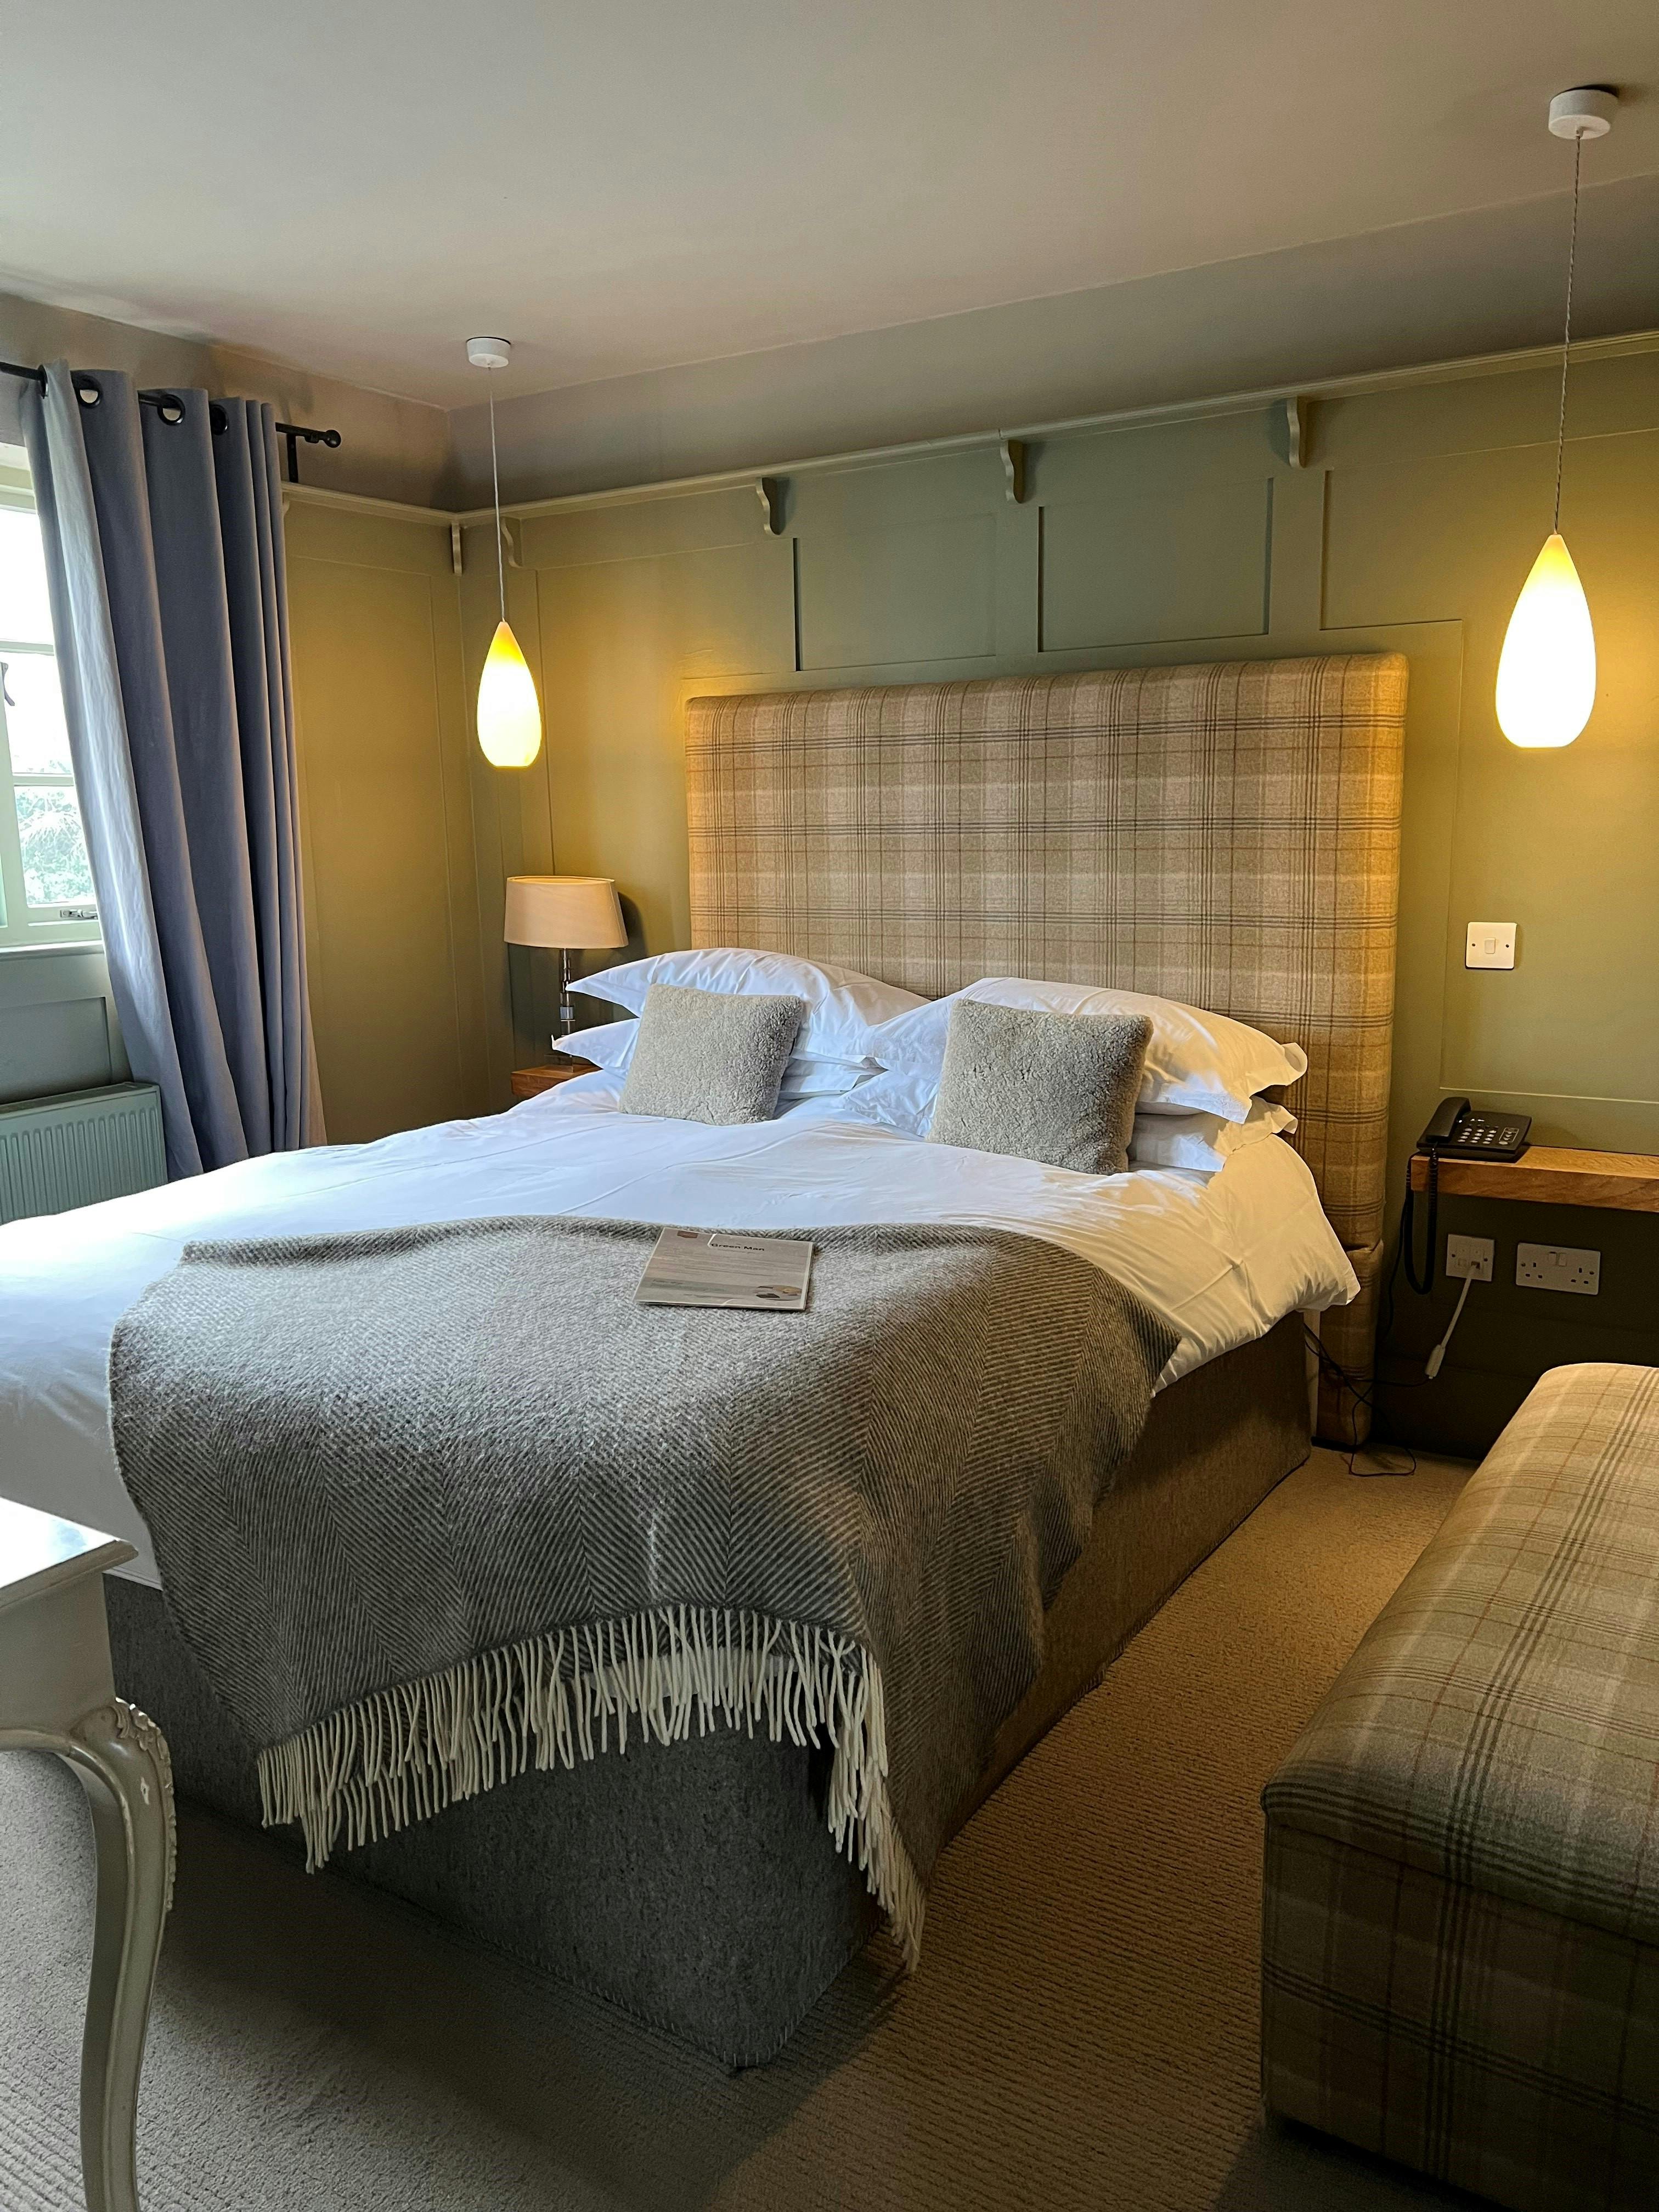 Sleep soundly in our comfortable rooms